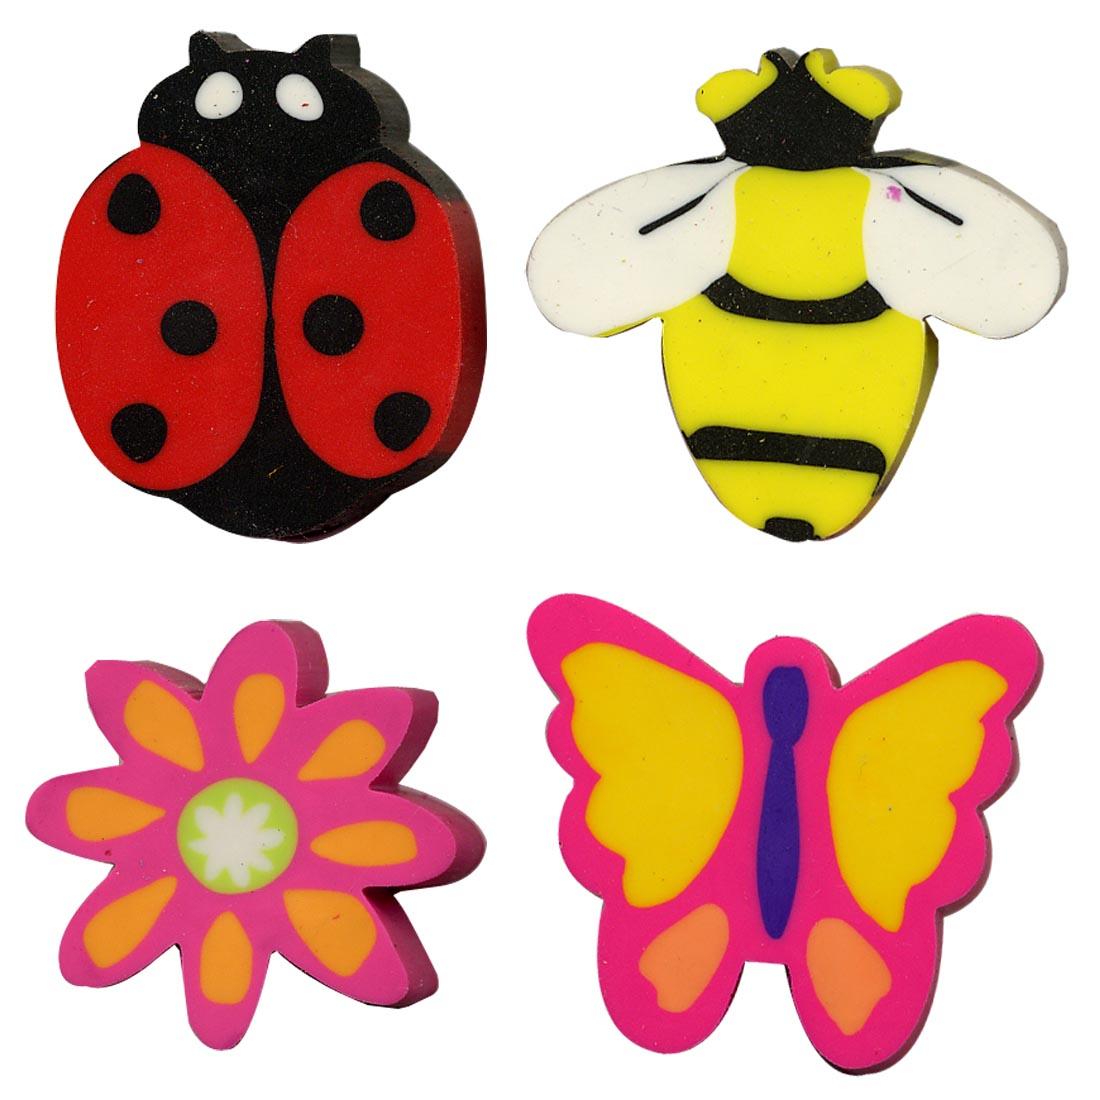 Springtime Pencil Topper Erasers include ladybug, bee, flower and butterfly